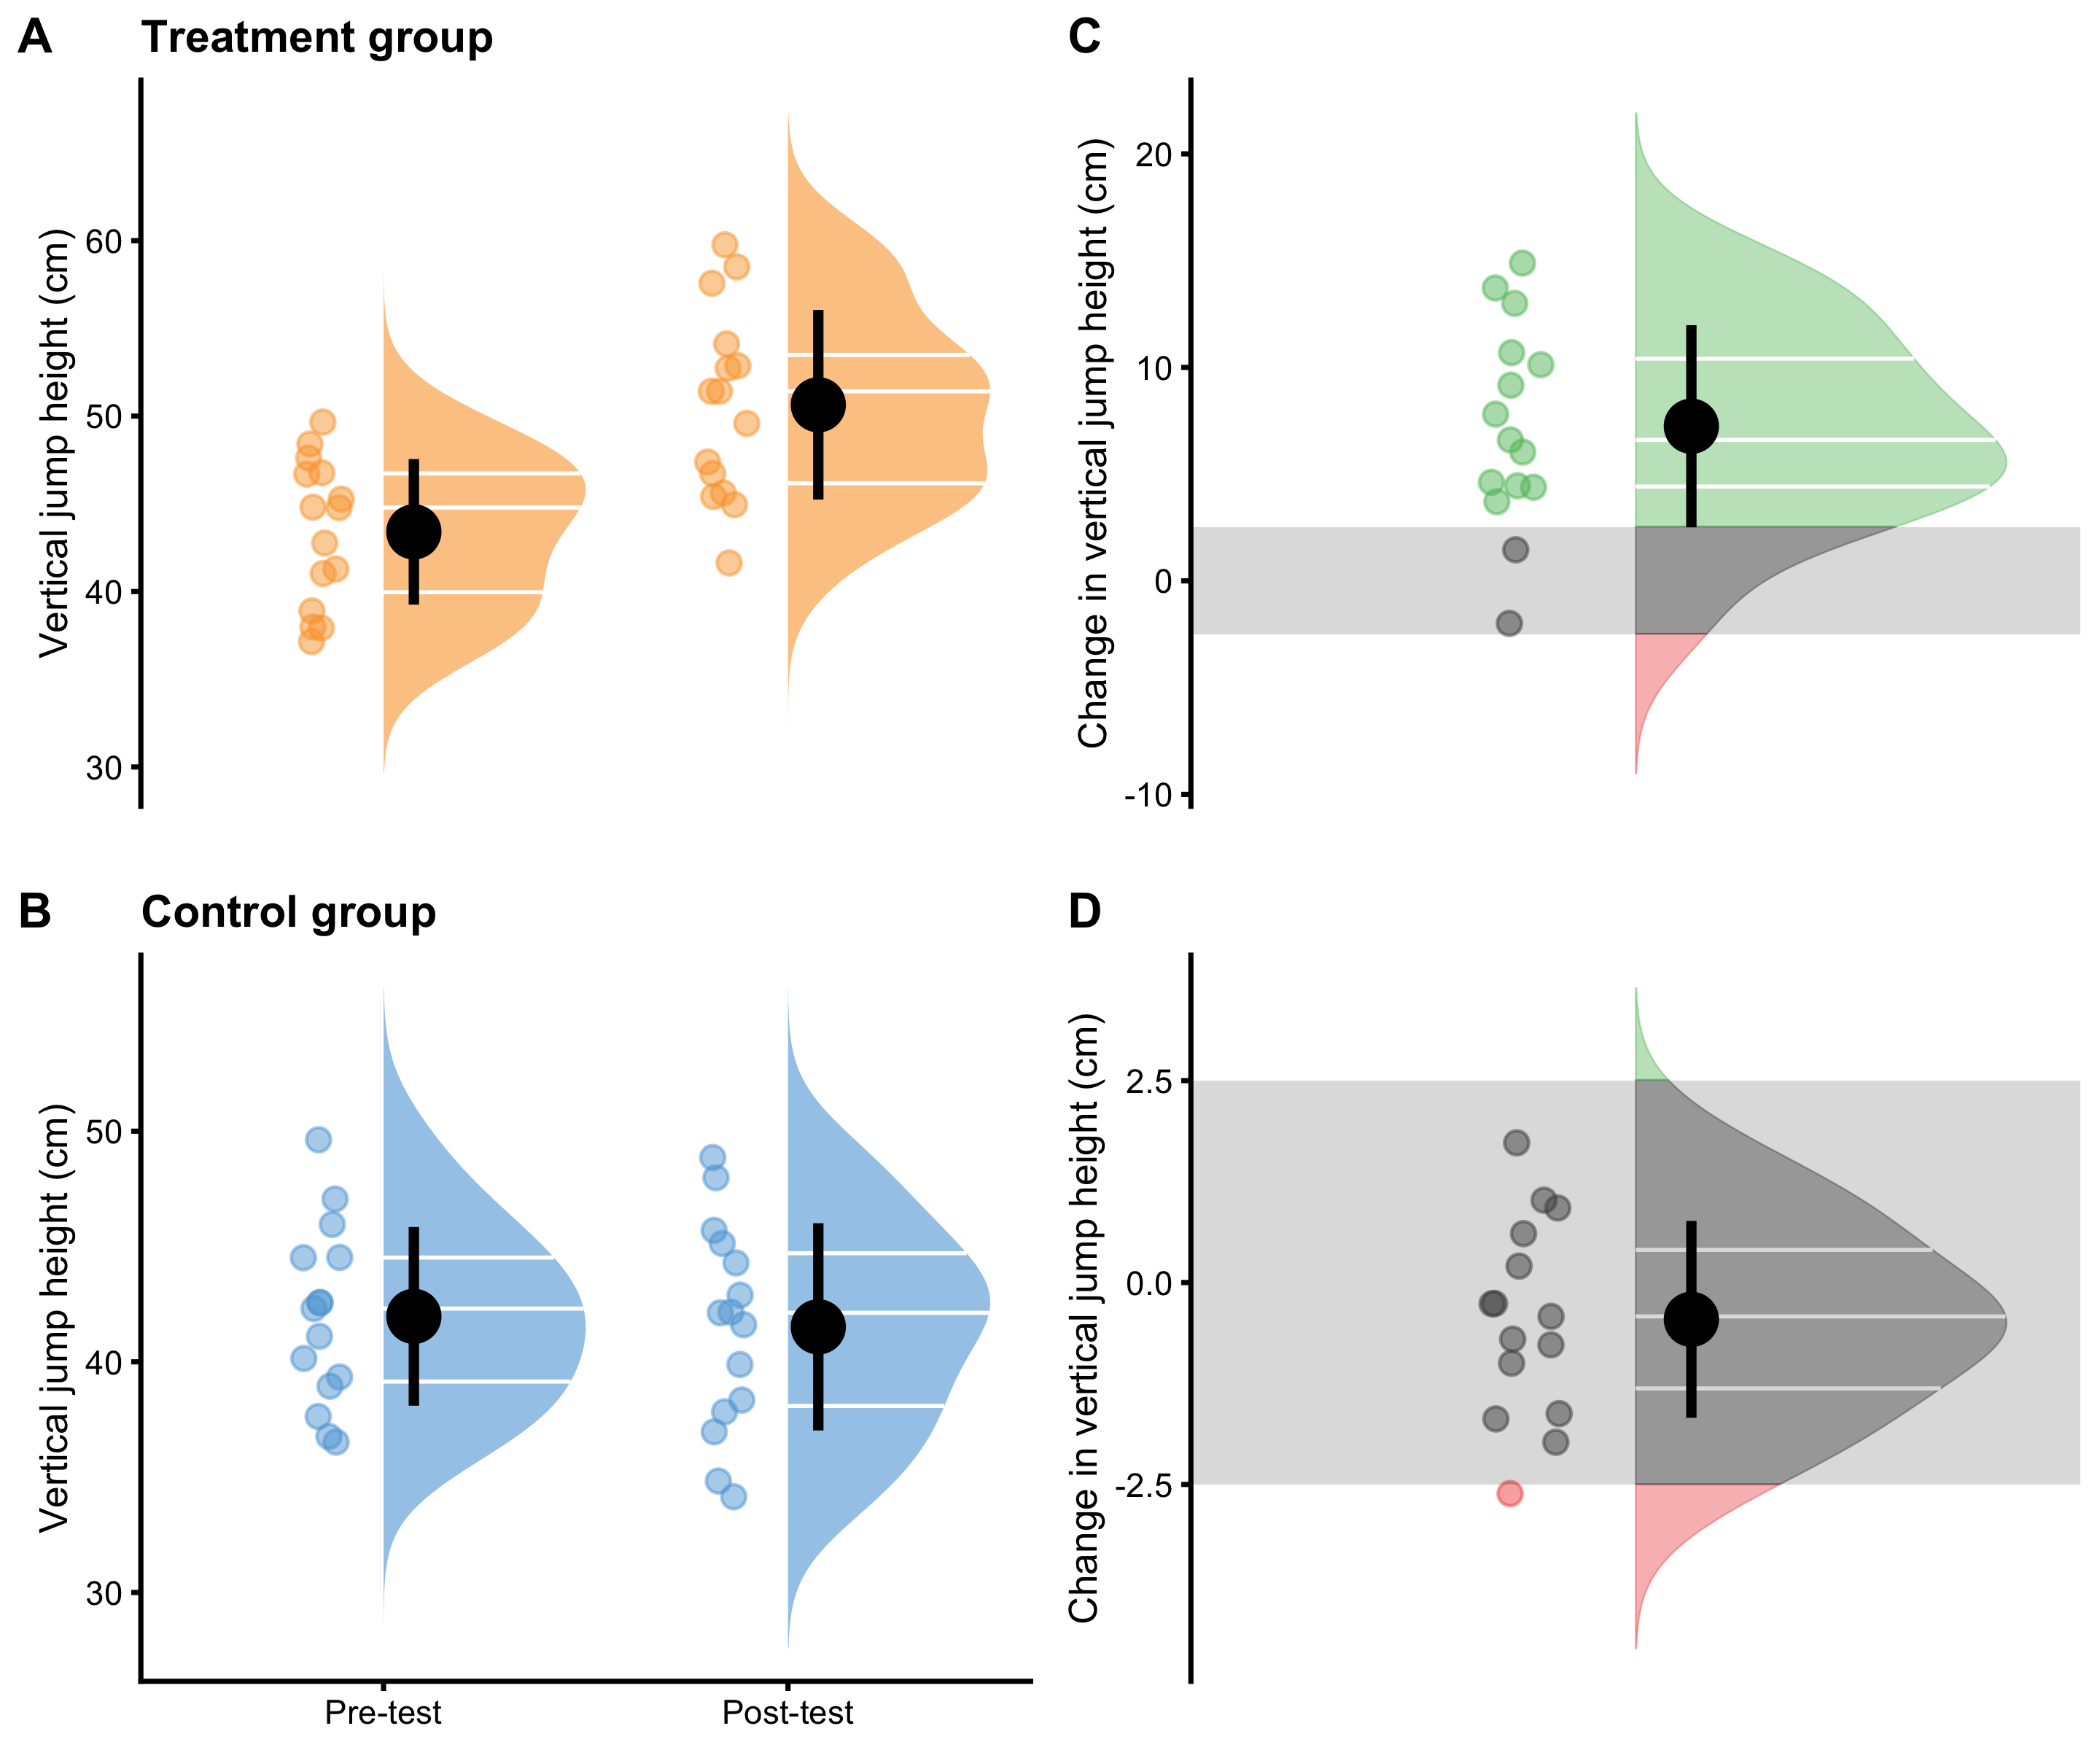 Visual analysis of RCT using Treatment and Control groups. A and B. Raincloud plot of the Pre-test and Post-test scores for Treatment and Control groups. Blue color indicates Control group and orange color indicates Treatment group. C and D. Raincloud plot of the change scores for the Treatment and Control groups. SESOI is indicated with a grey band